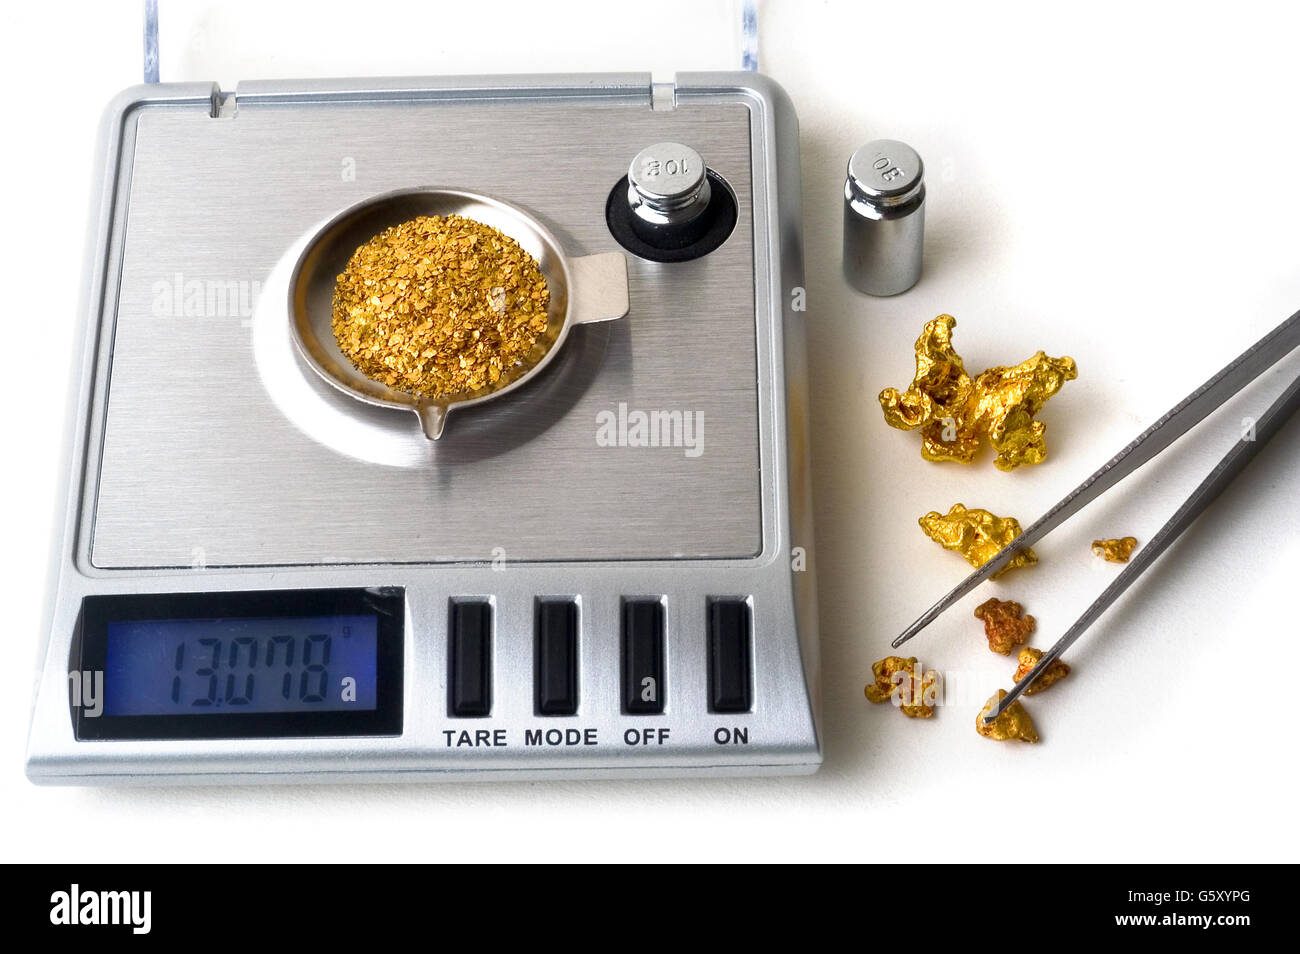 Gold Nugget Scale 0.01 grams HIGH Accuracy!